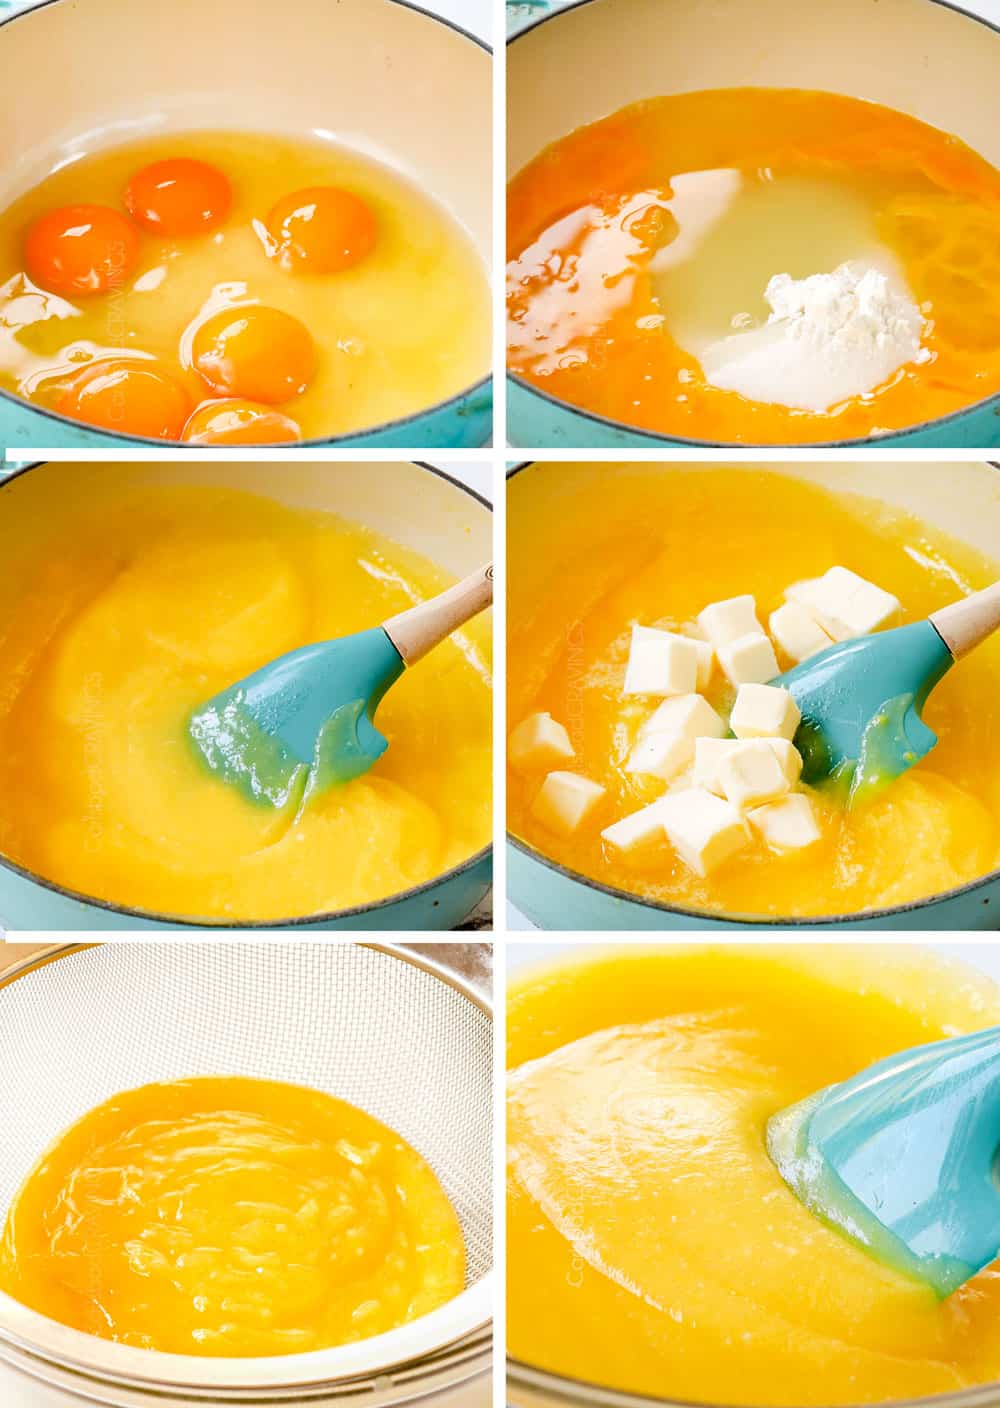 a collage showing how to make lemon cheesecake by making lemon curd by 1) adding eggs, 2) adding lemon juice, sugar and lemon zest, cooking until thickened, adding butter, straining through a fine mesh sieve